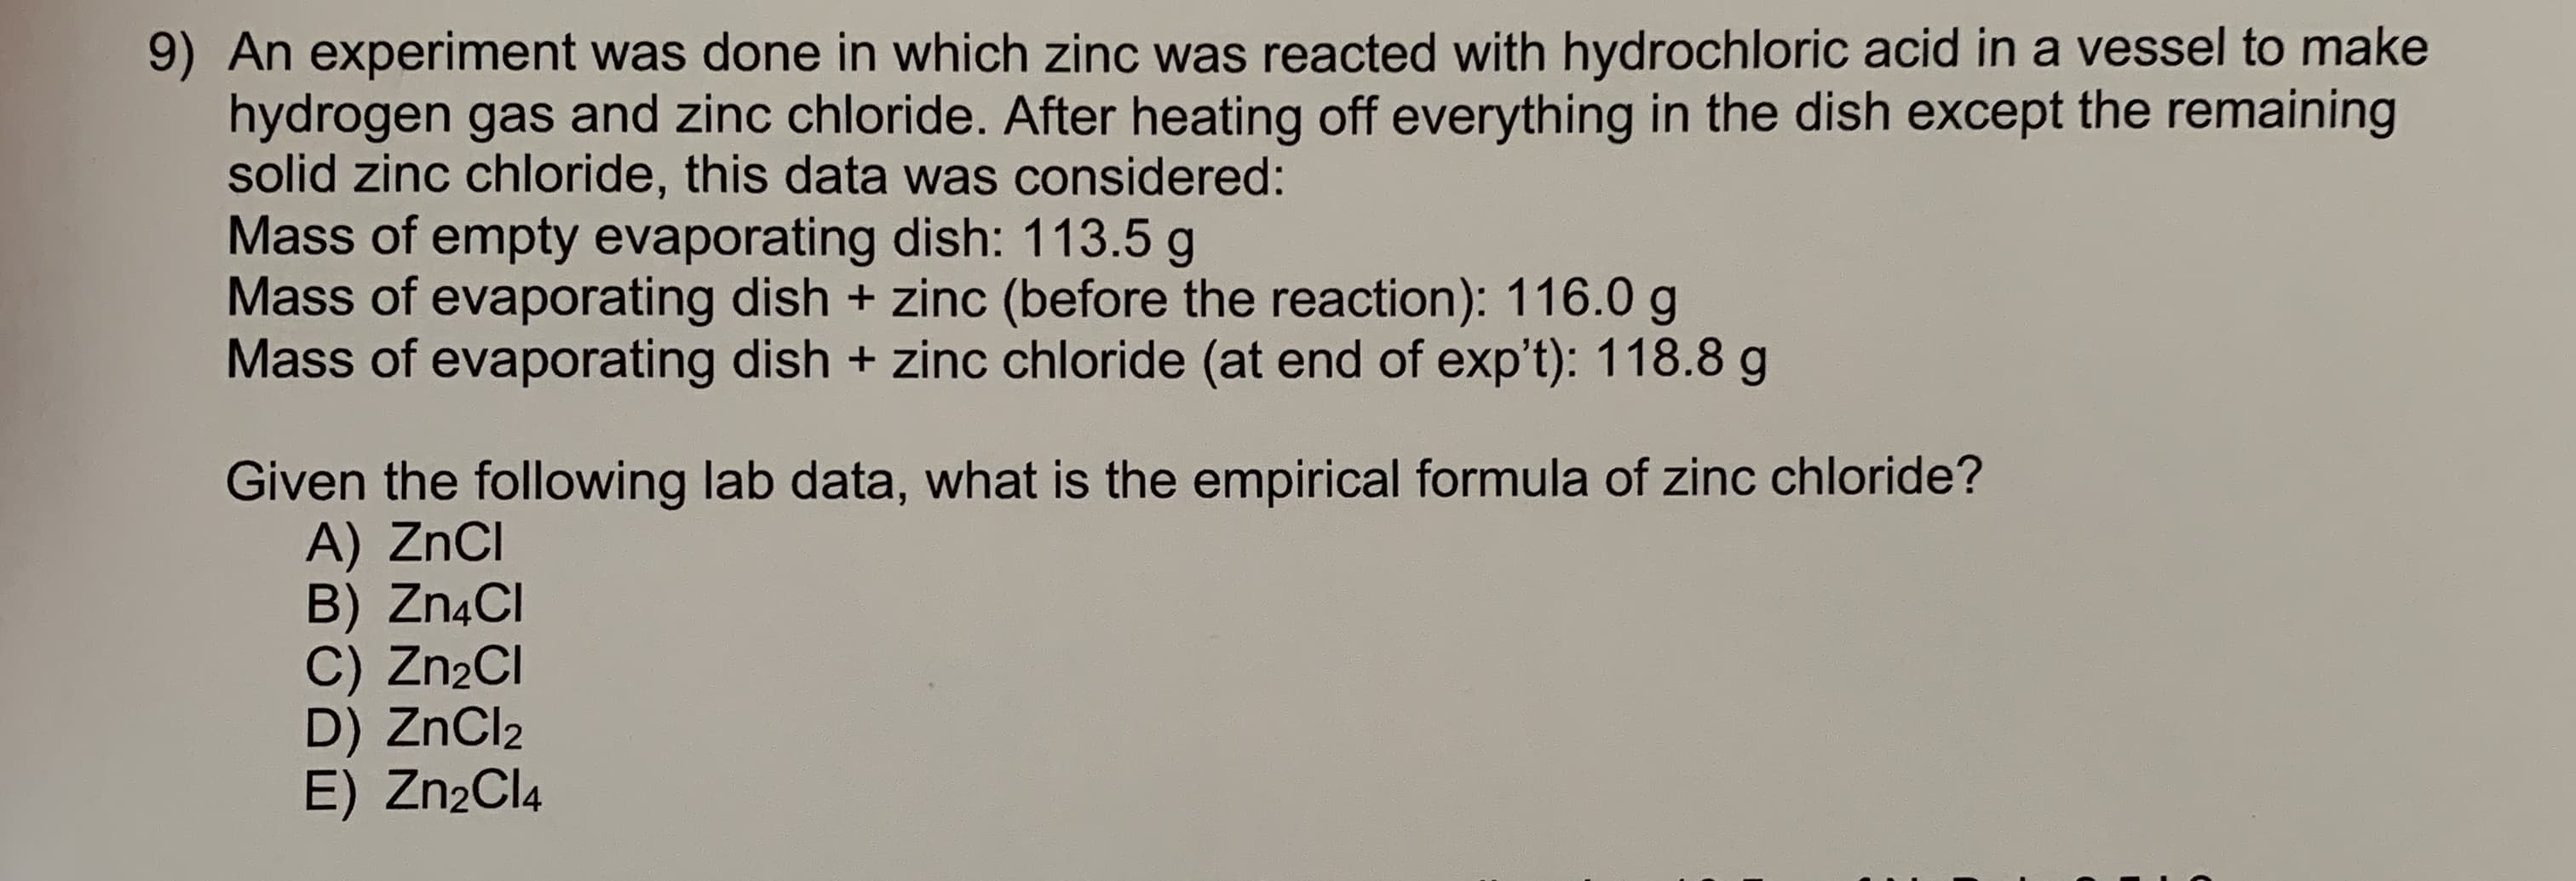 9) An experiment was done in which zinc was reacted with hydrochloric acid in a vessel to make
hydrogen gas and zinc chloride. After heating off everything in the dish except the remaining
solid zinc chloride, this data was considered:
Mass of empty evaporating dish: 113.5 g
Mass of evaporating dish + zinc (before the reaction): 116.0 g
Mass of evaporating dish + zinc chloride (at end of exp't): 118.8 g
Given the following lab data, what is the empirical formula of zinc chloride?
A) ZnCI
B) Zn4CI
C) Zn2Cl
D) ZnCl2
E) Zn2Cl4
